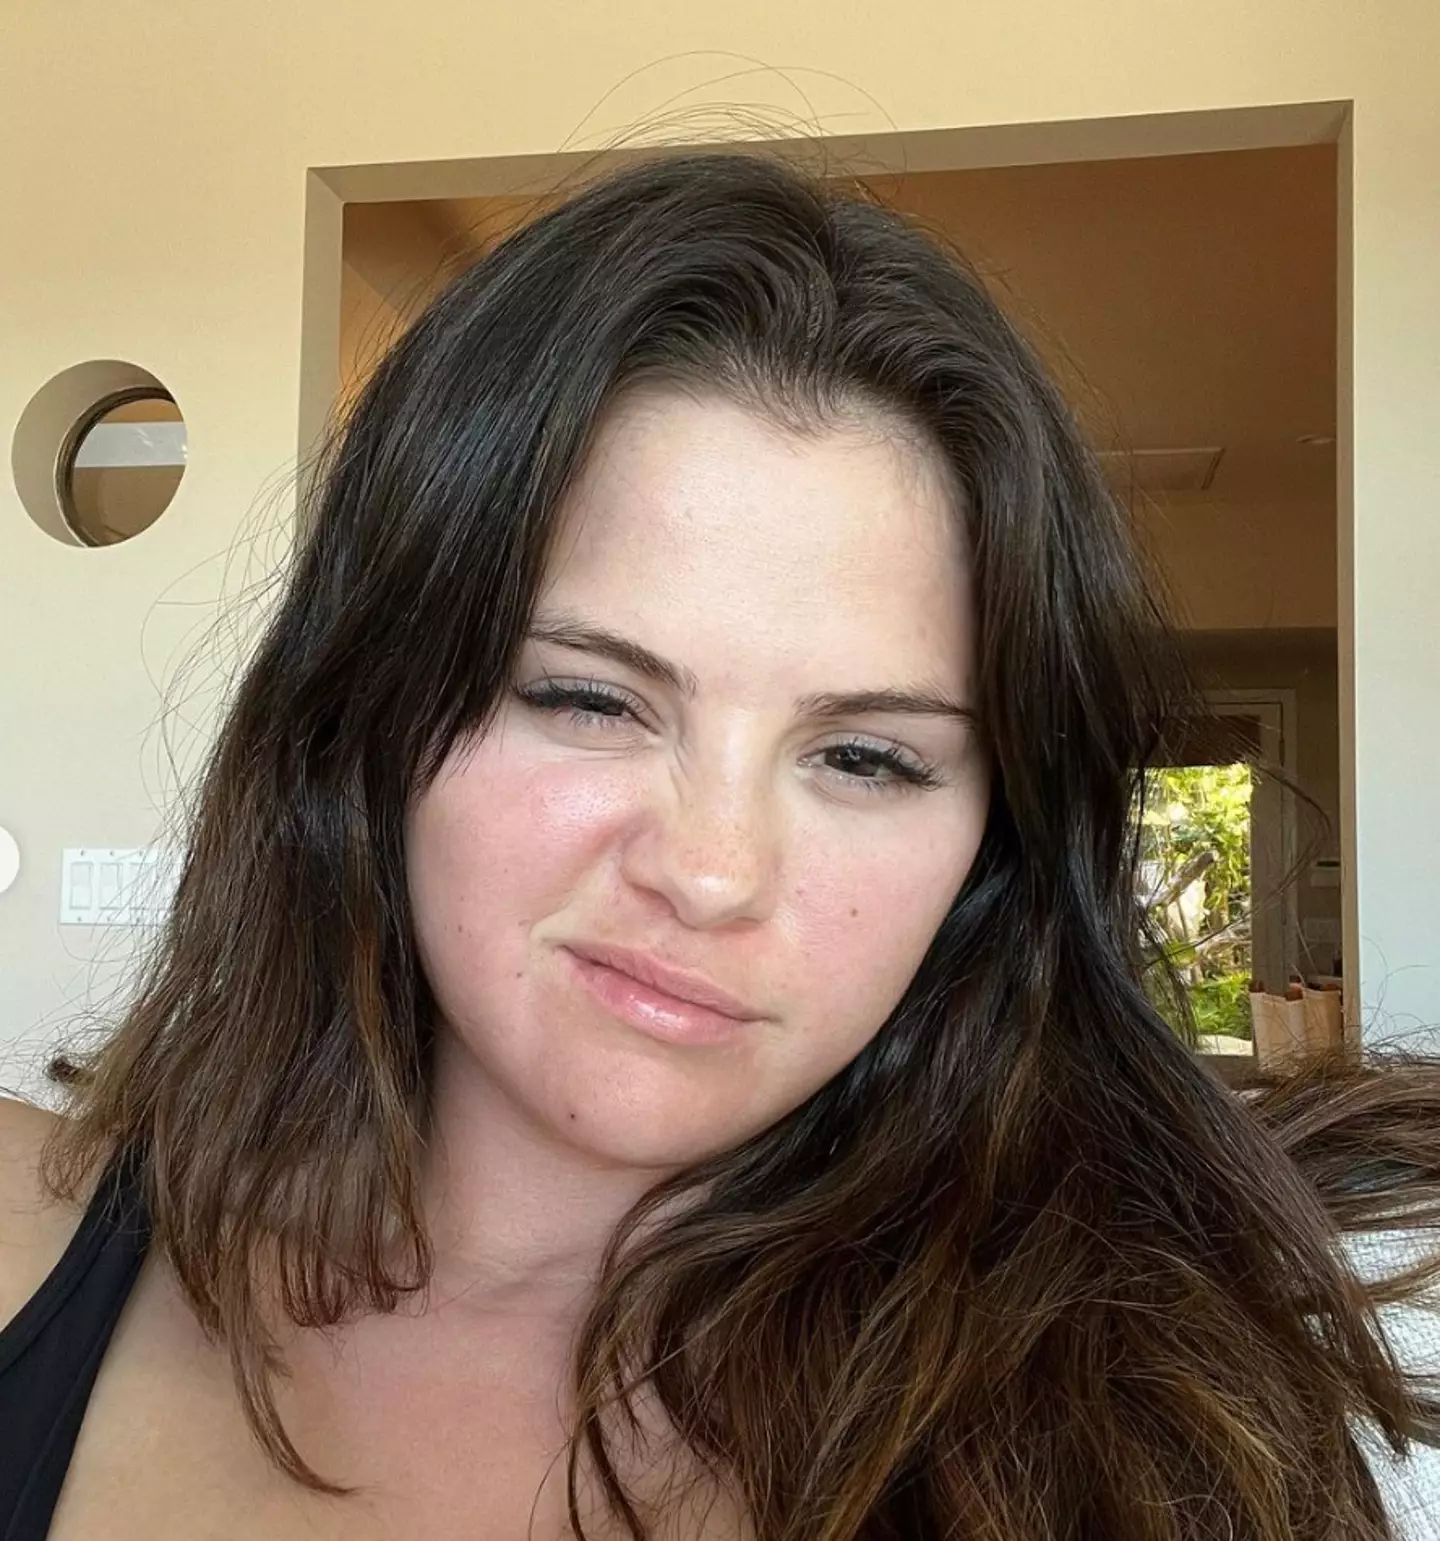 Selena doesn't appear to be wearing makeup in the post.